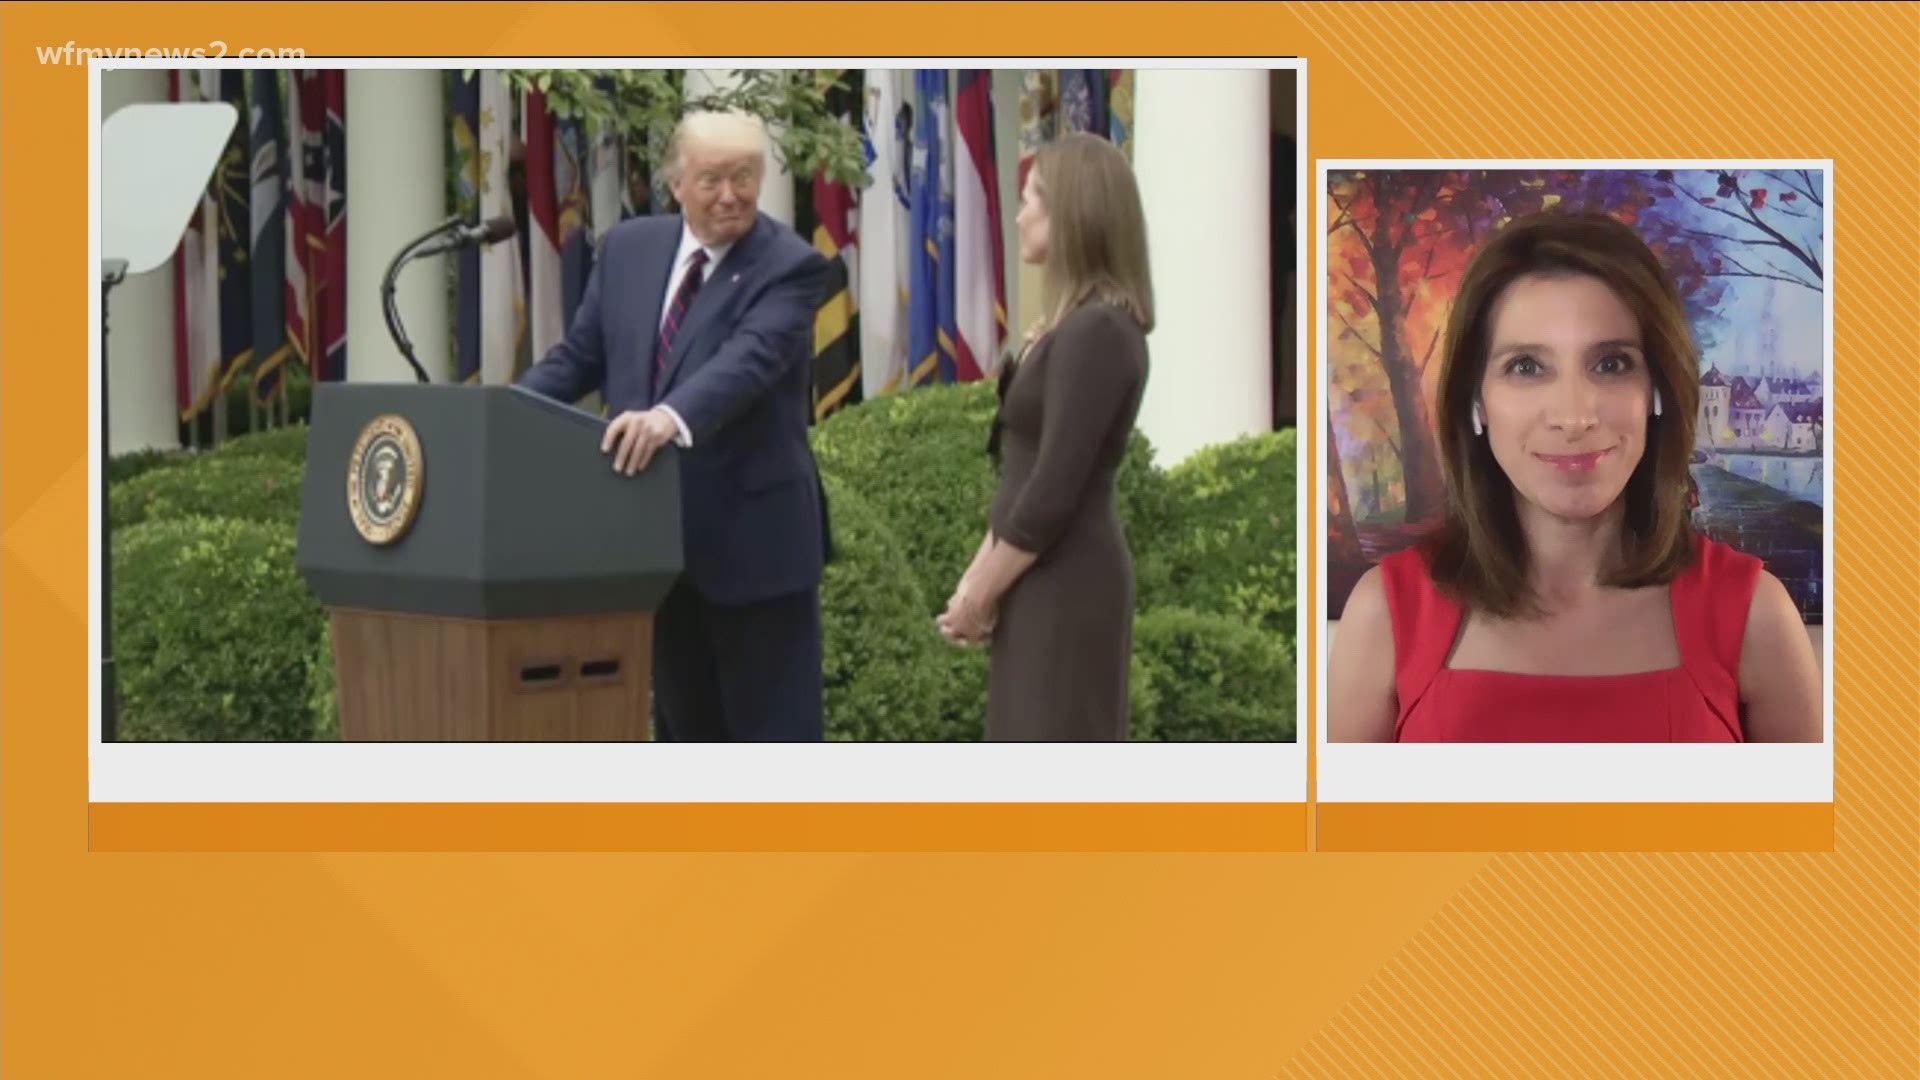 A look at President Trump and Judge Barrett’s body language before announcing her nomination to the Supreme Court.